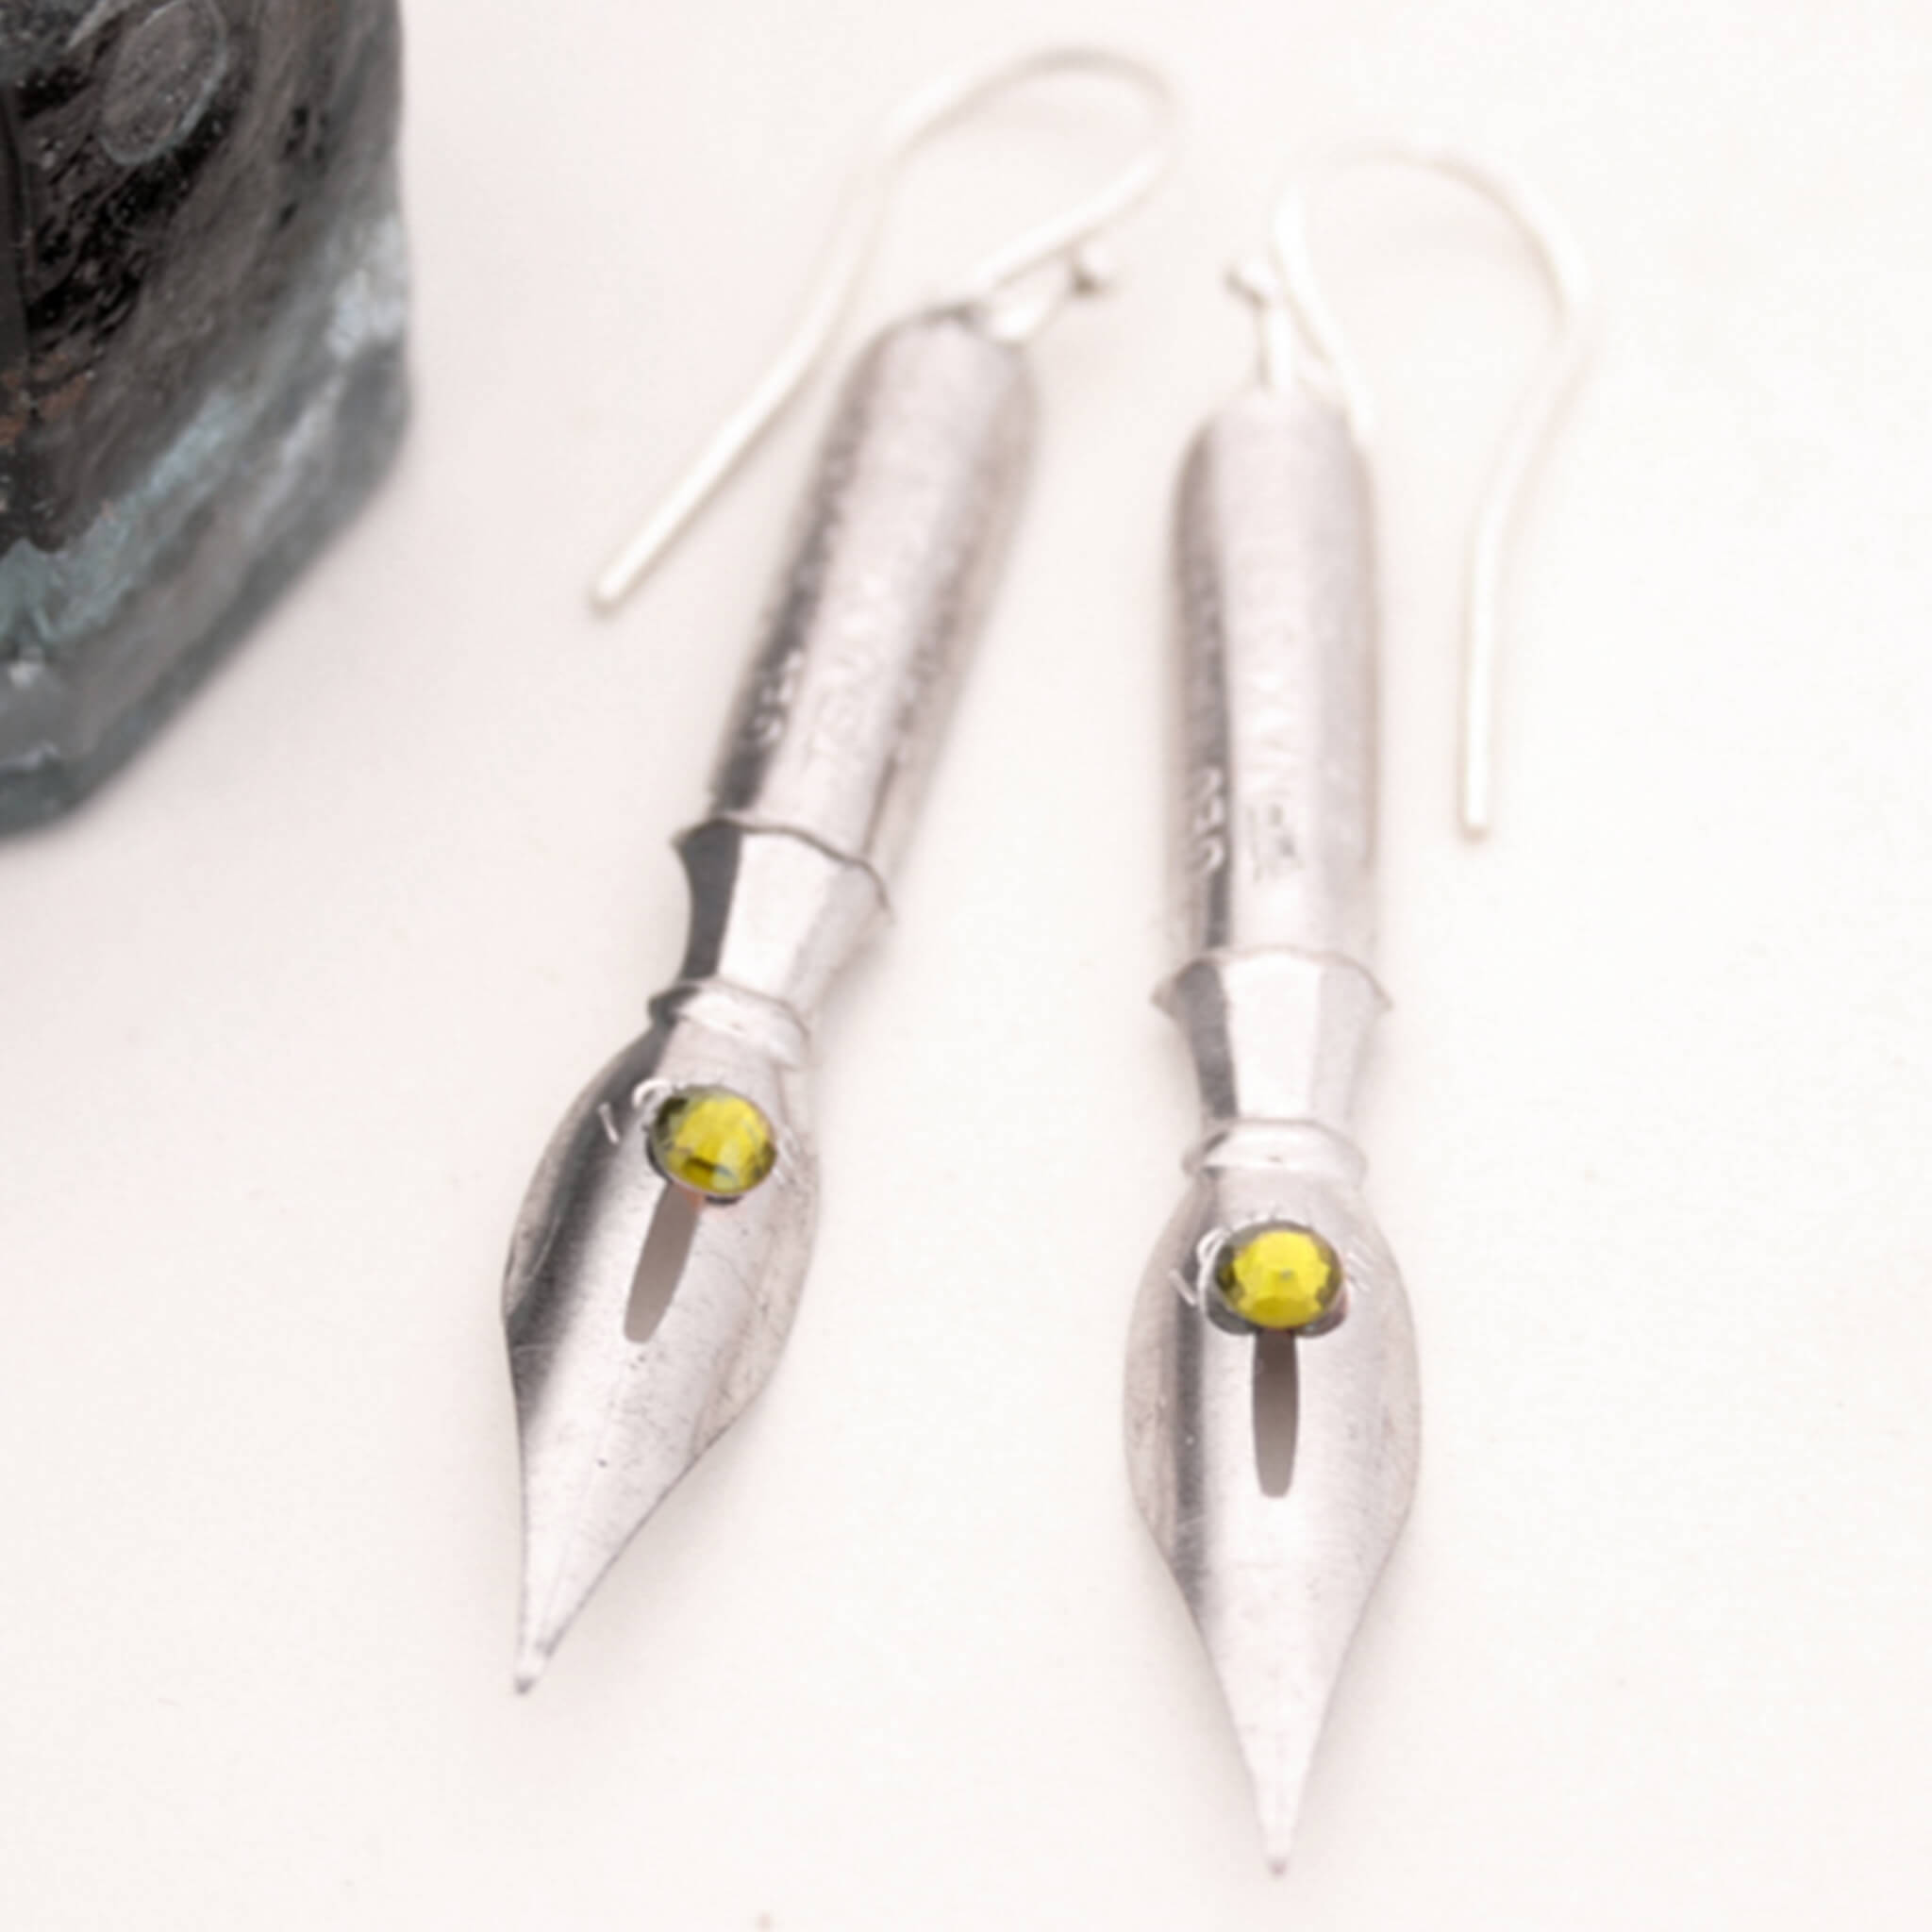 pen nib earrings with olivine crystals on them lying on a piece of paper